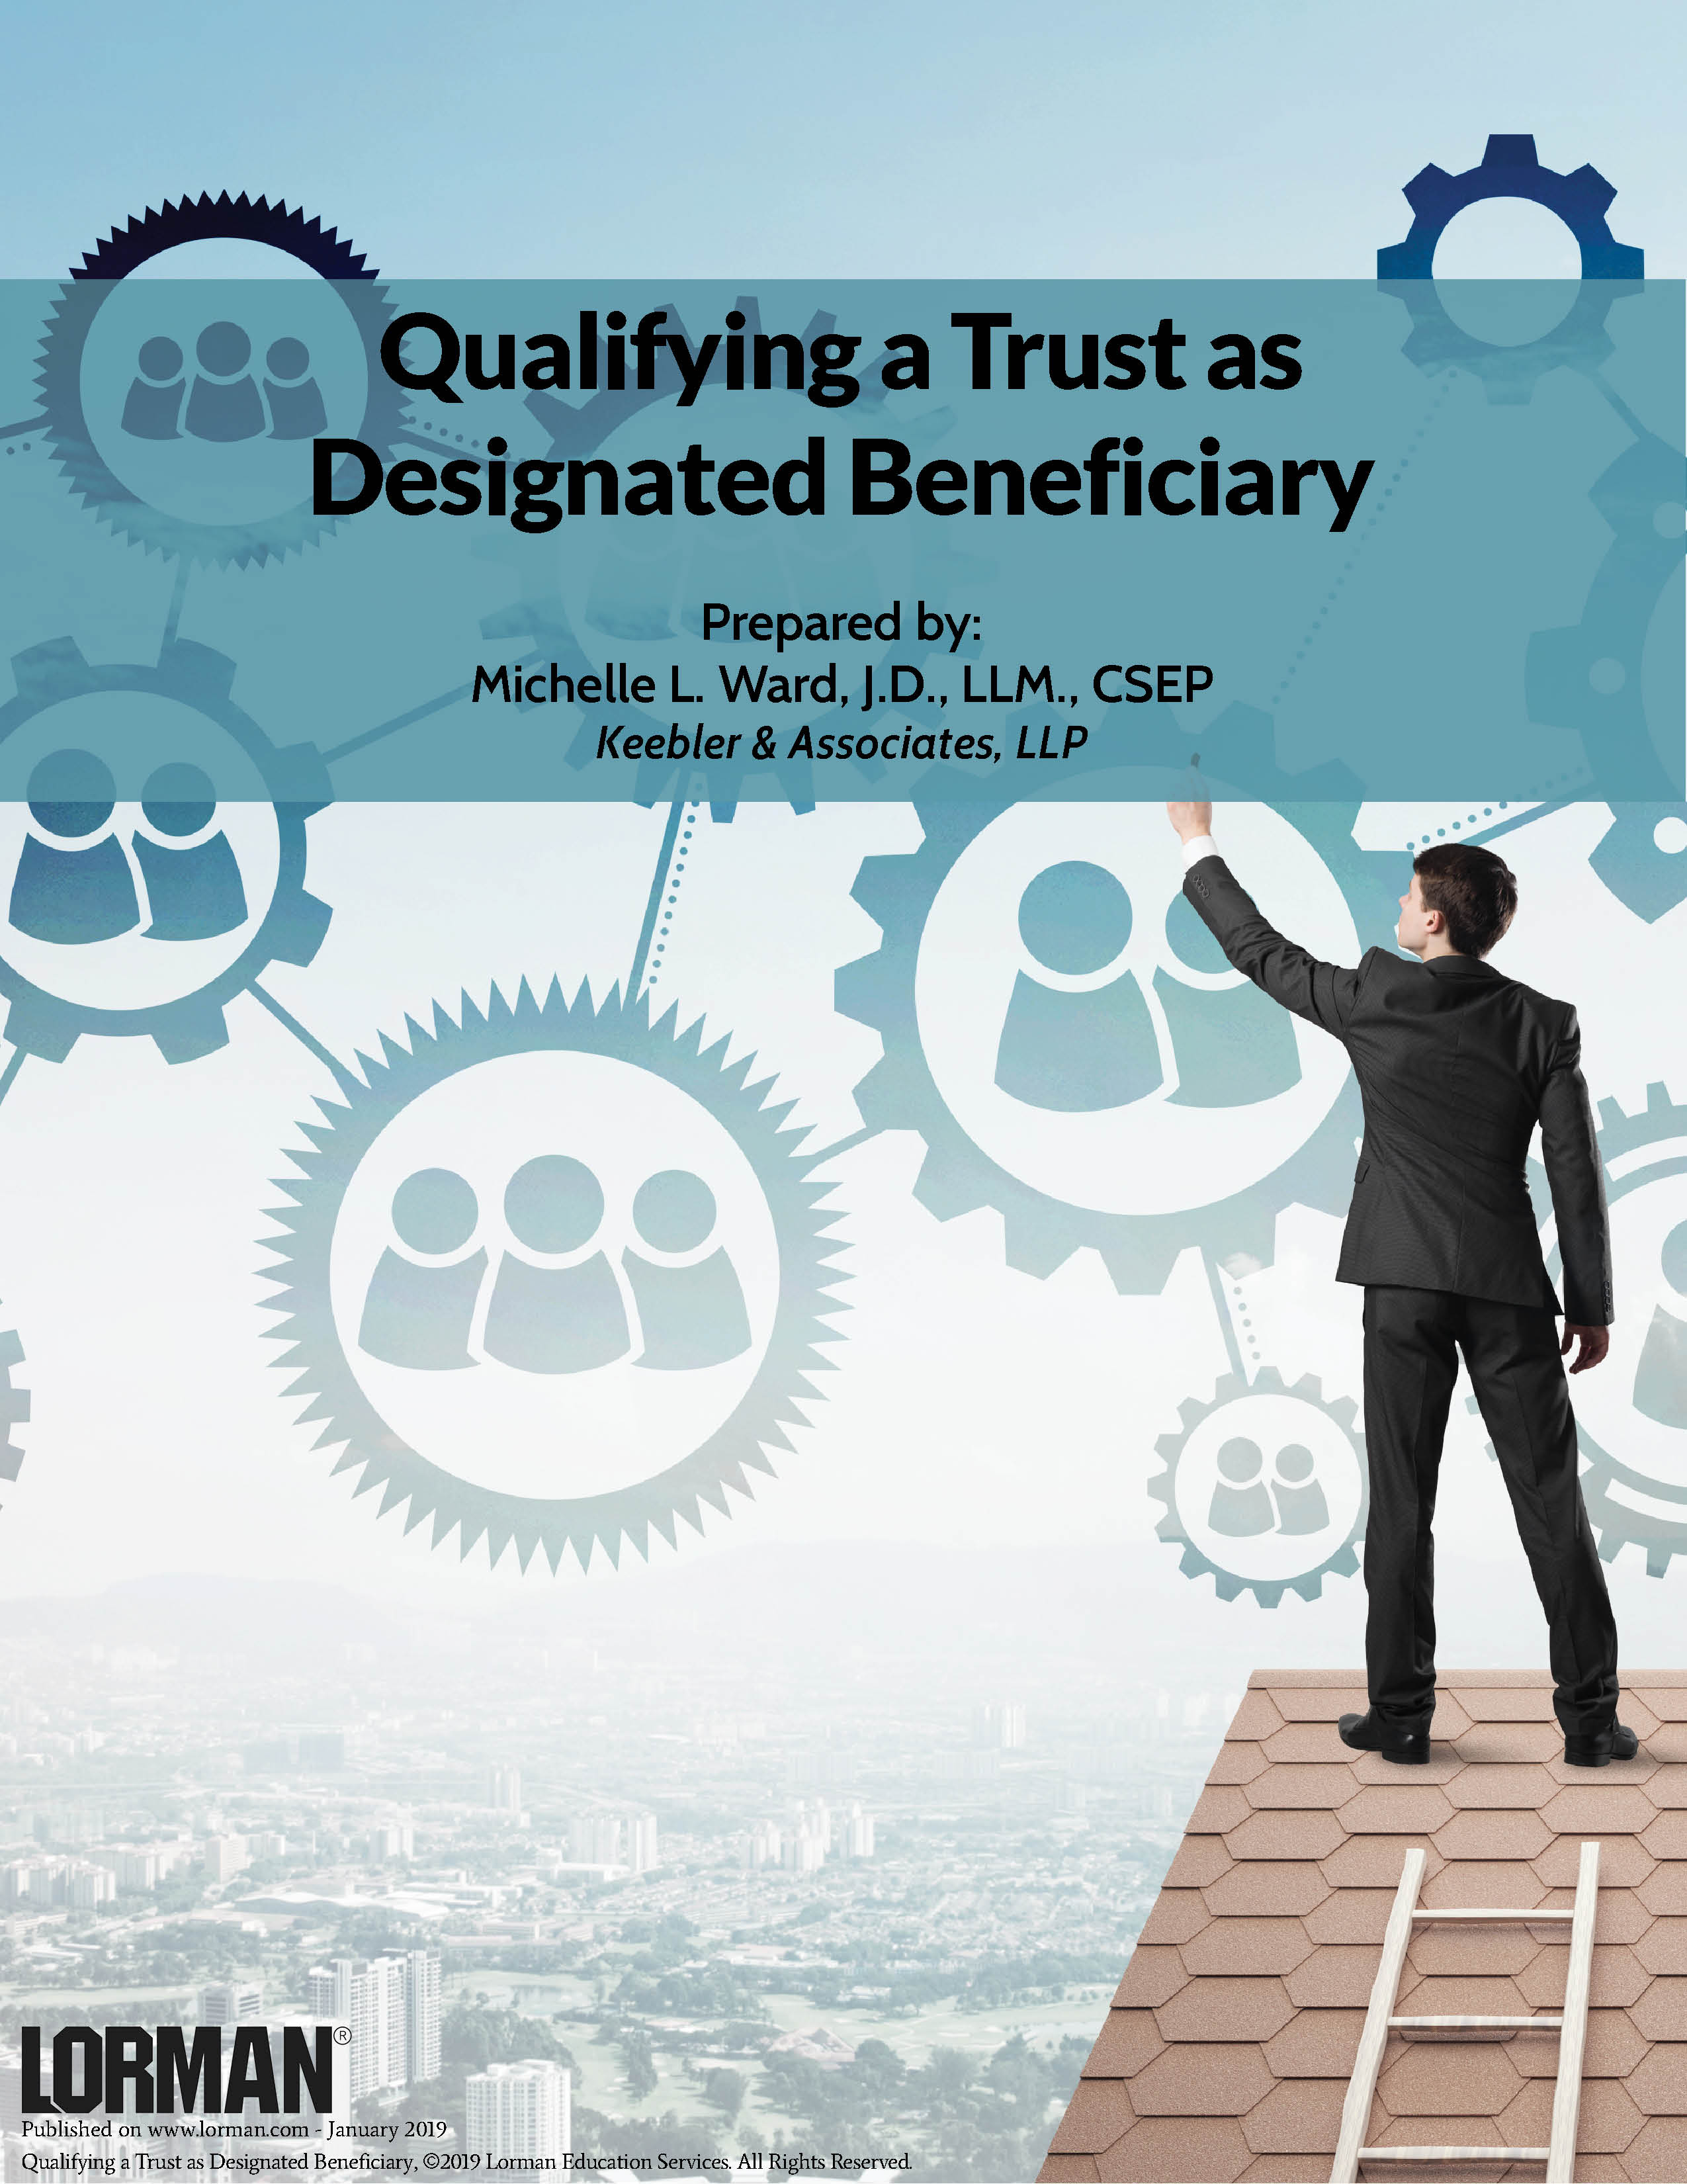 Qualifying a Trust as Designated Beneficiary